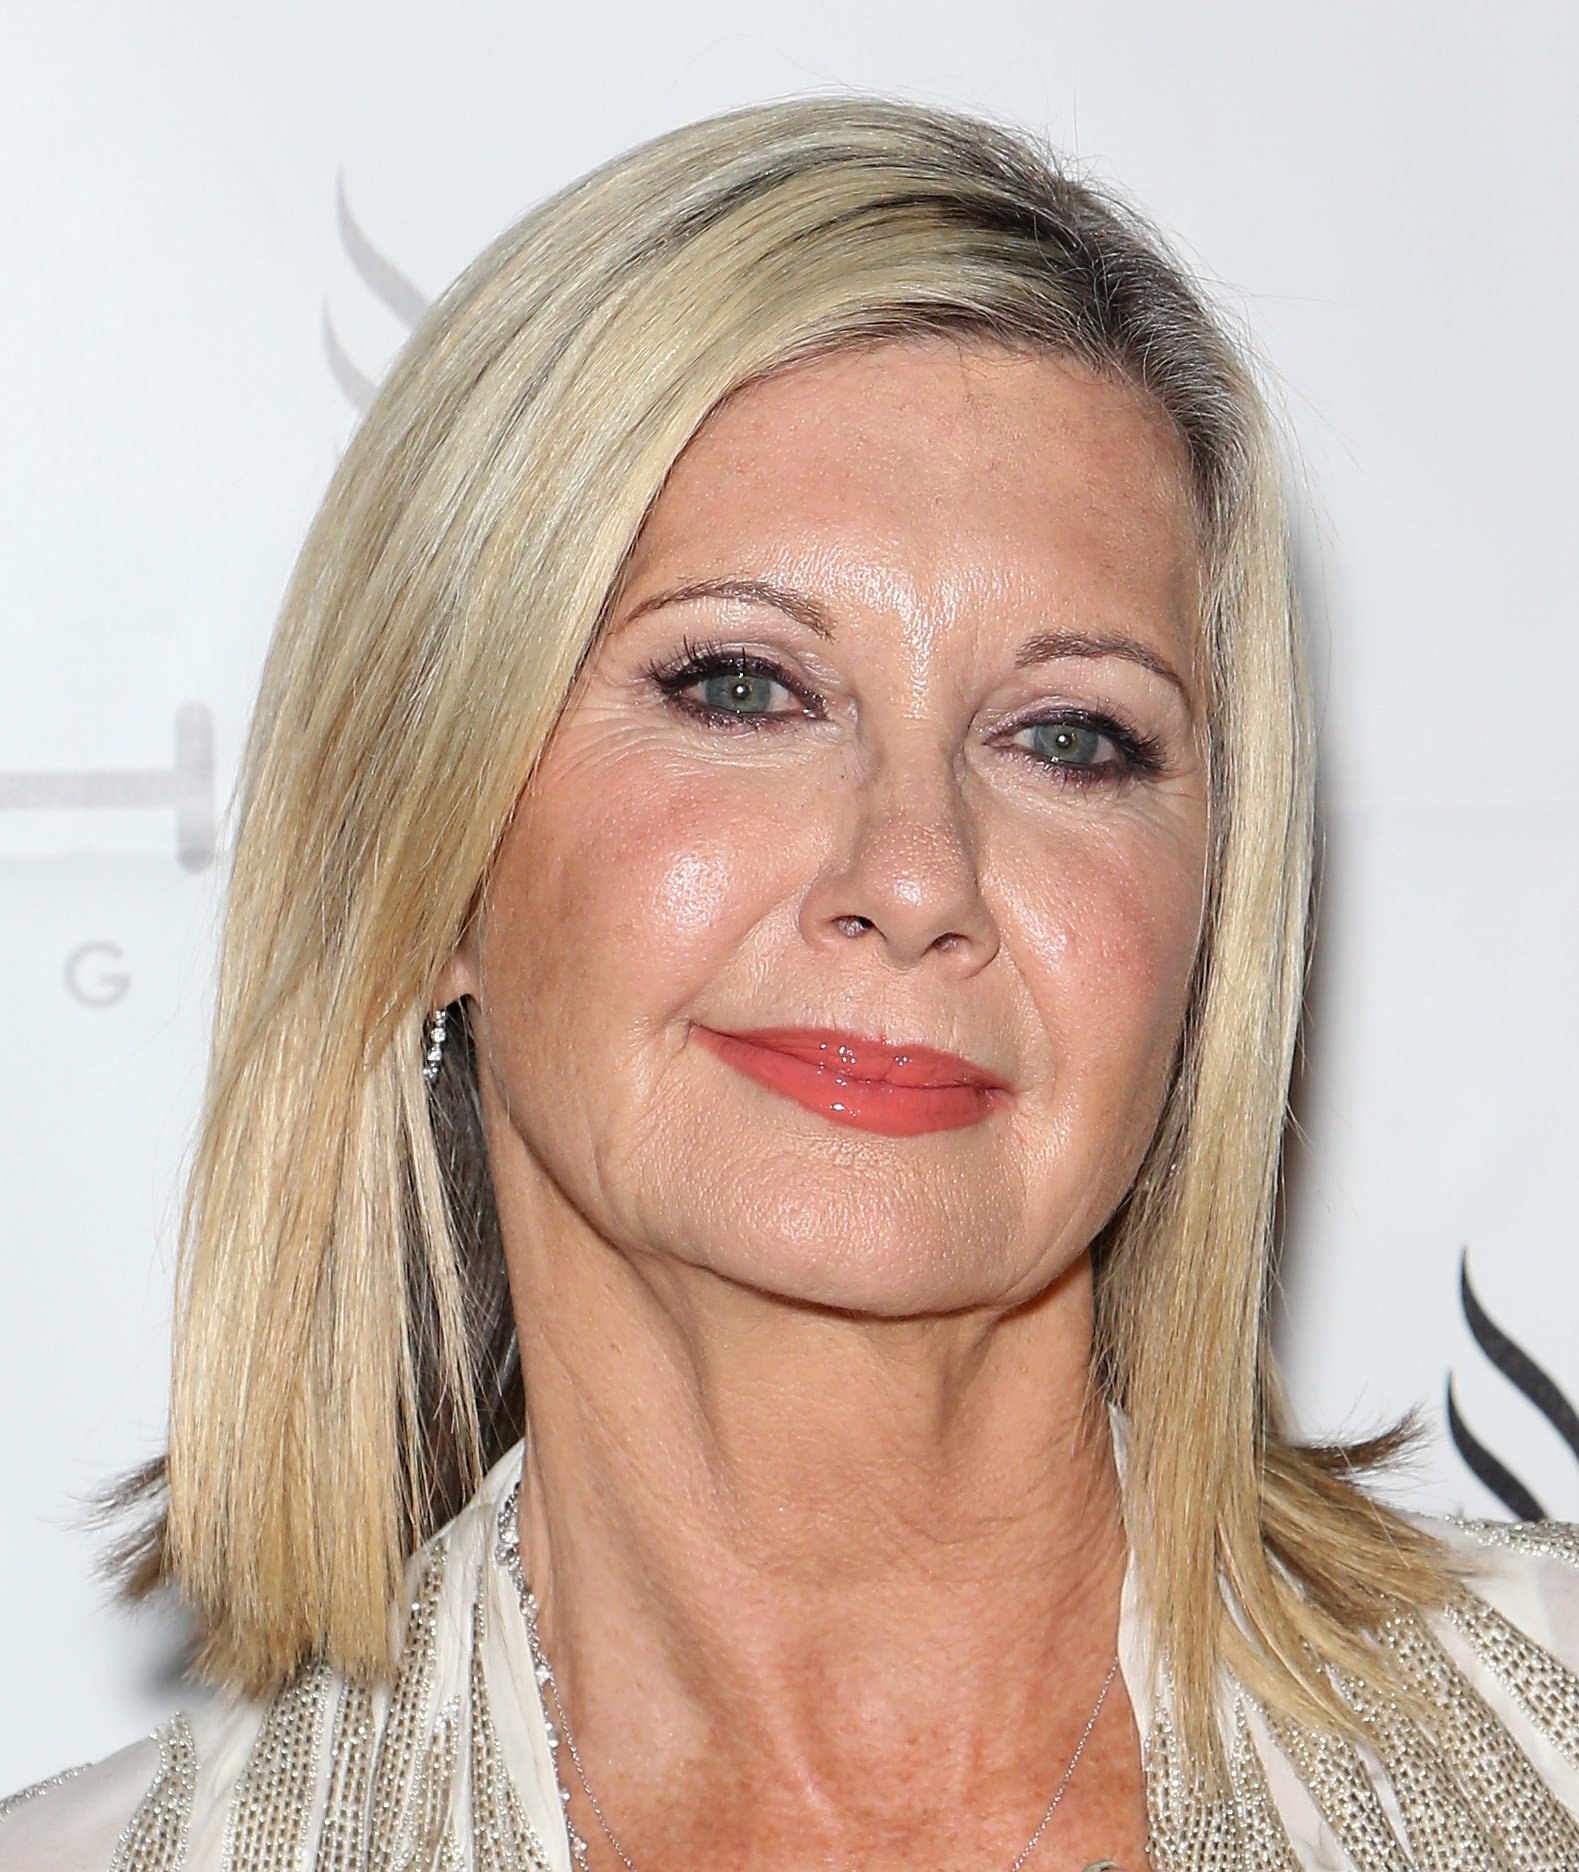 Singer and actress Olivia Newton-John during the 35th anniversary of "Xanadu" at Share Nightclub on August 9, 2015 in Las Vegas, Nevada.┃Source: Getty Images